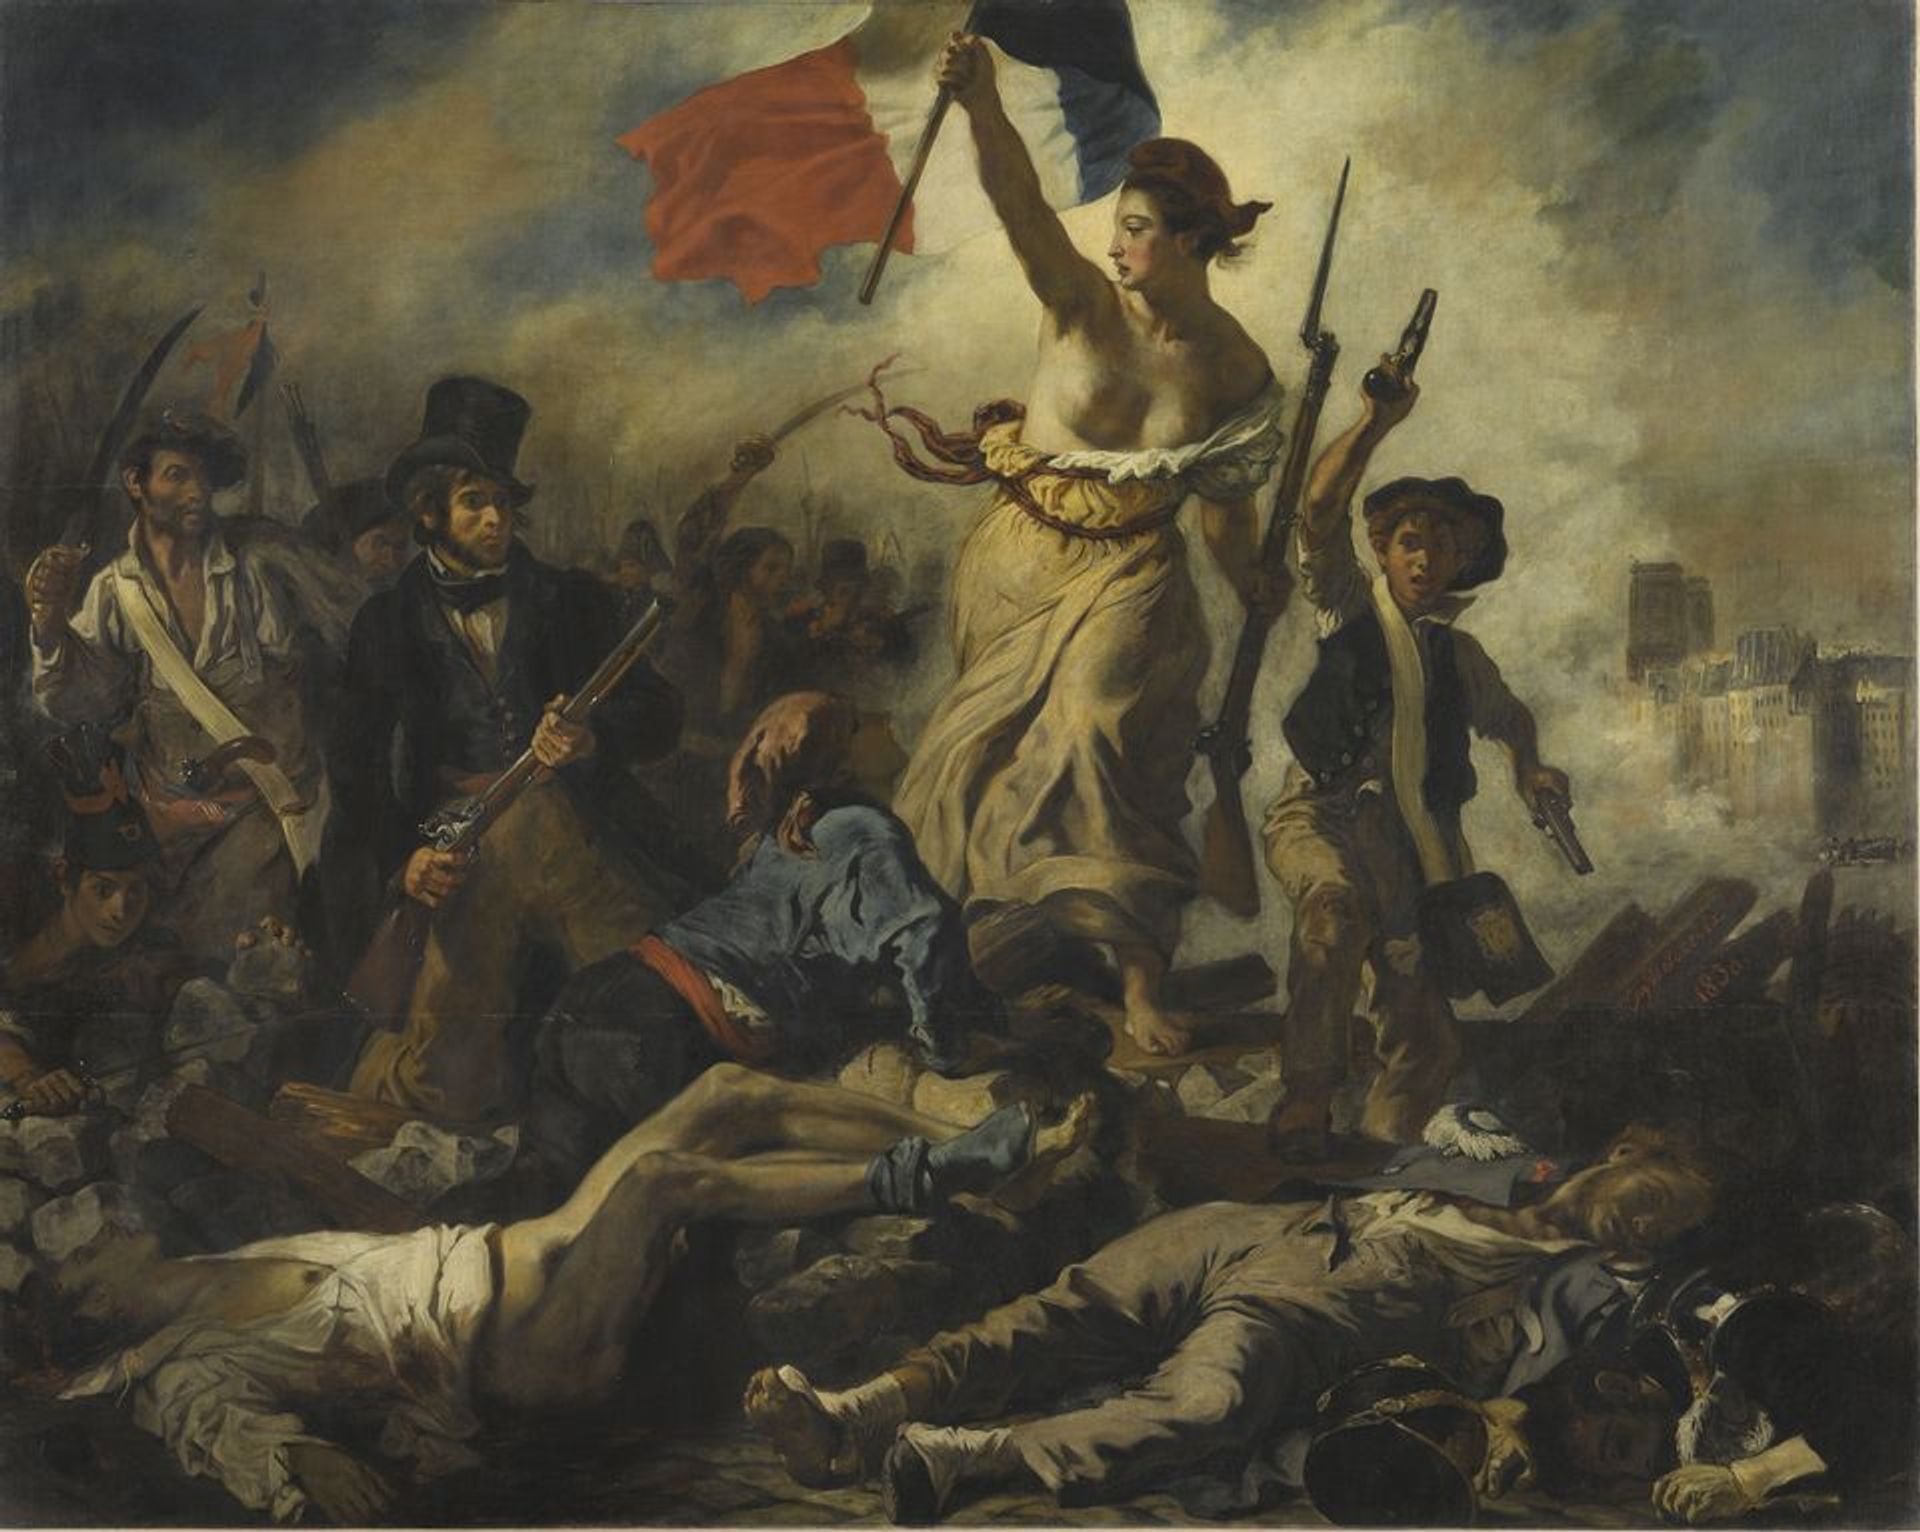 A major Delacroix exhibition led record numbers of people to the Louvre in 2018. Eugène Delacroix, Liberty Leading the People (1831). Courtesy of the Musée du Louvre